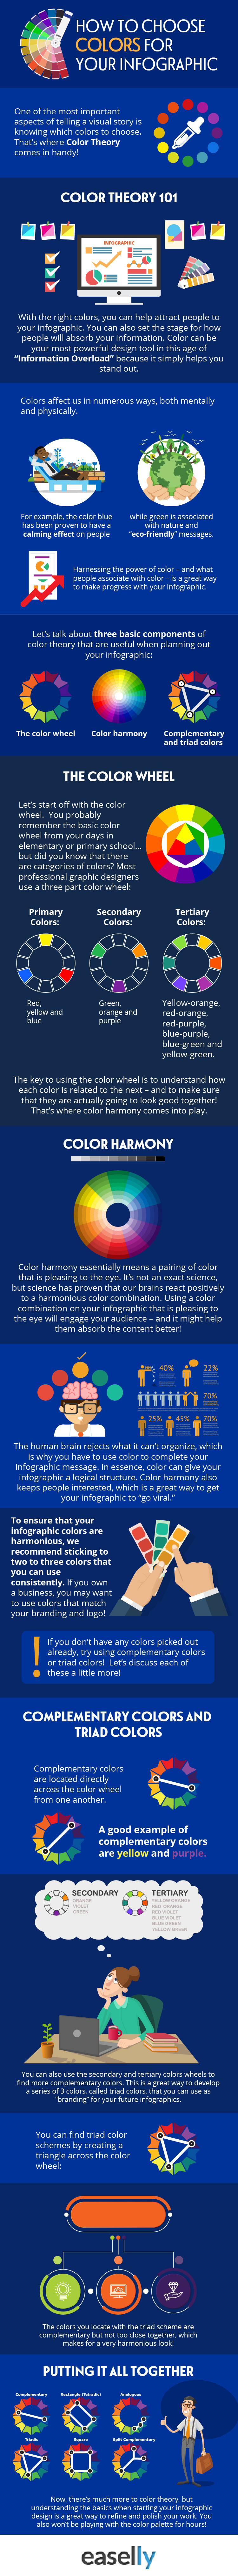 how to choose colors for your infographic